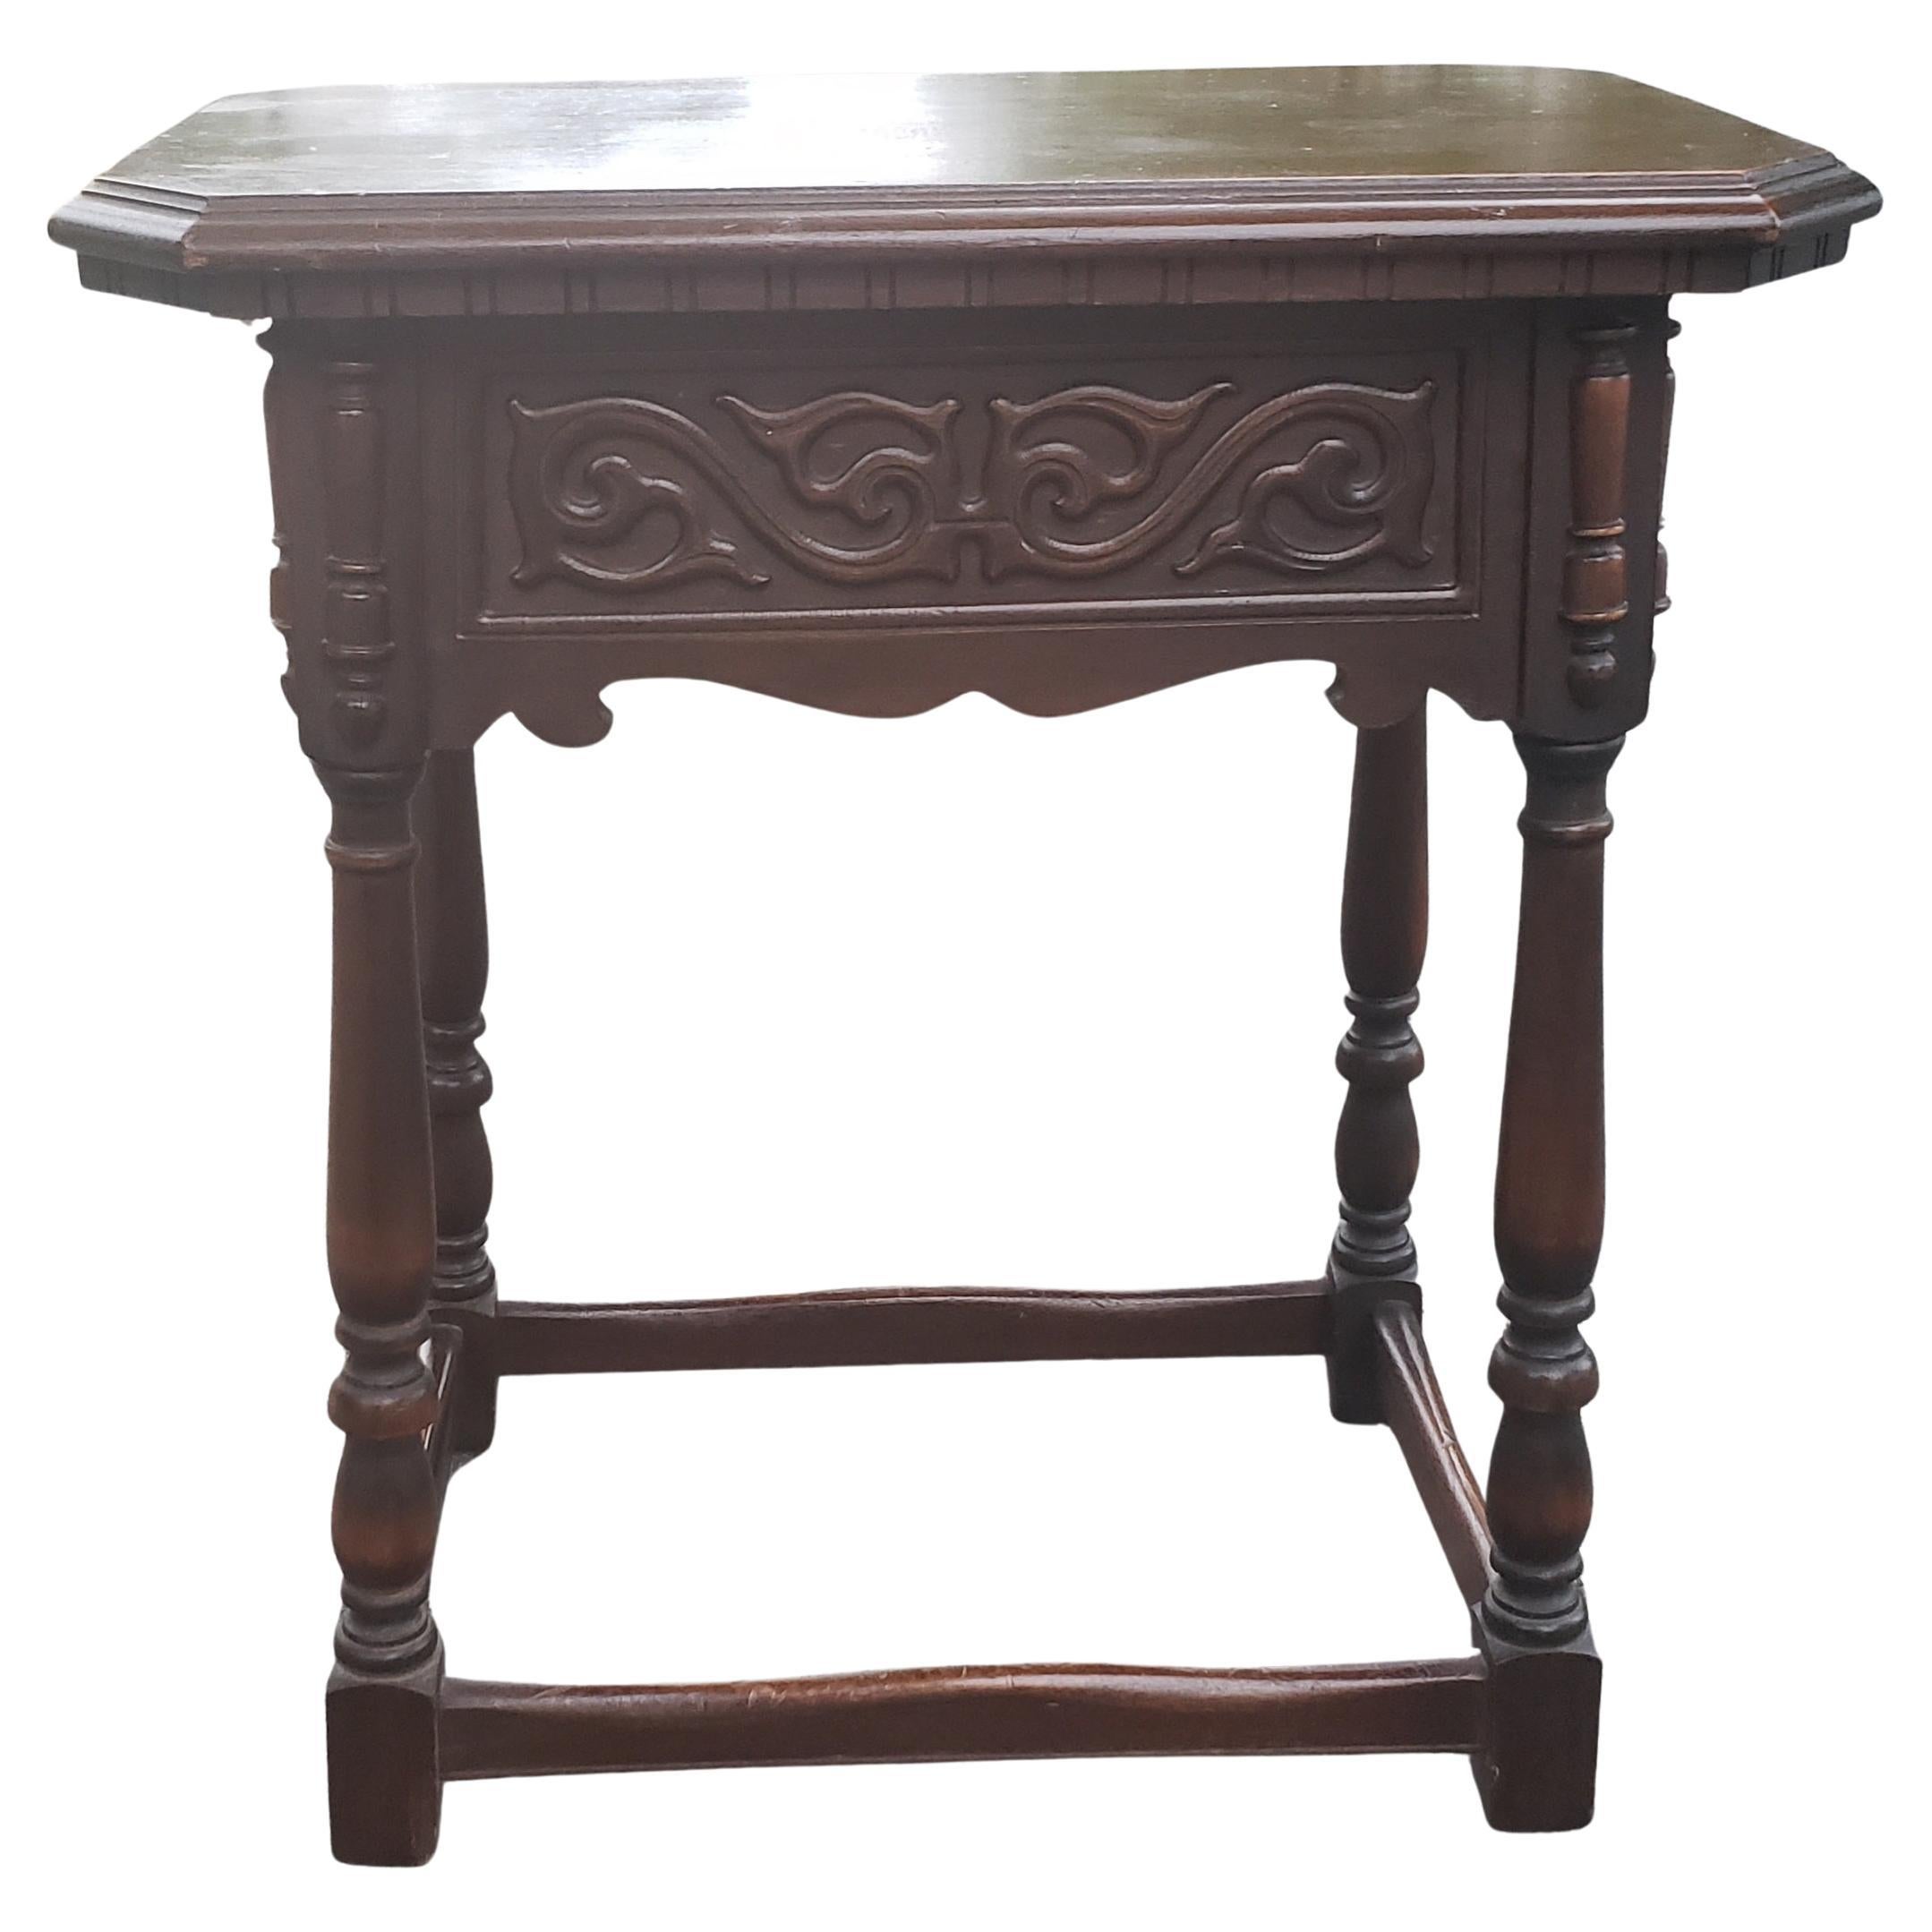 Antique Edwardian Carved Walnut Side Table, Circa 1920s In Good Condition For Sale In Germantown, MD